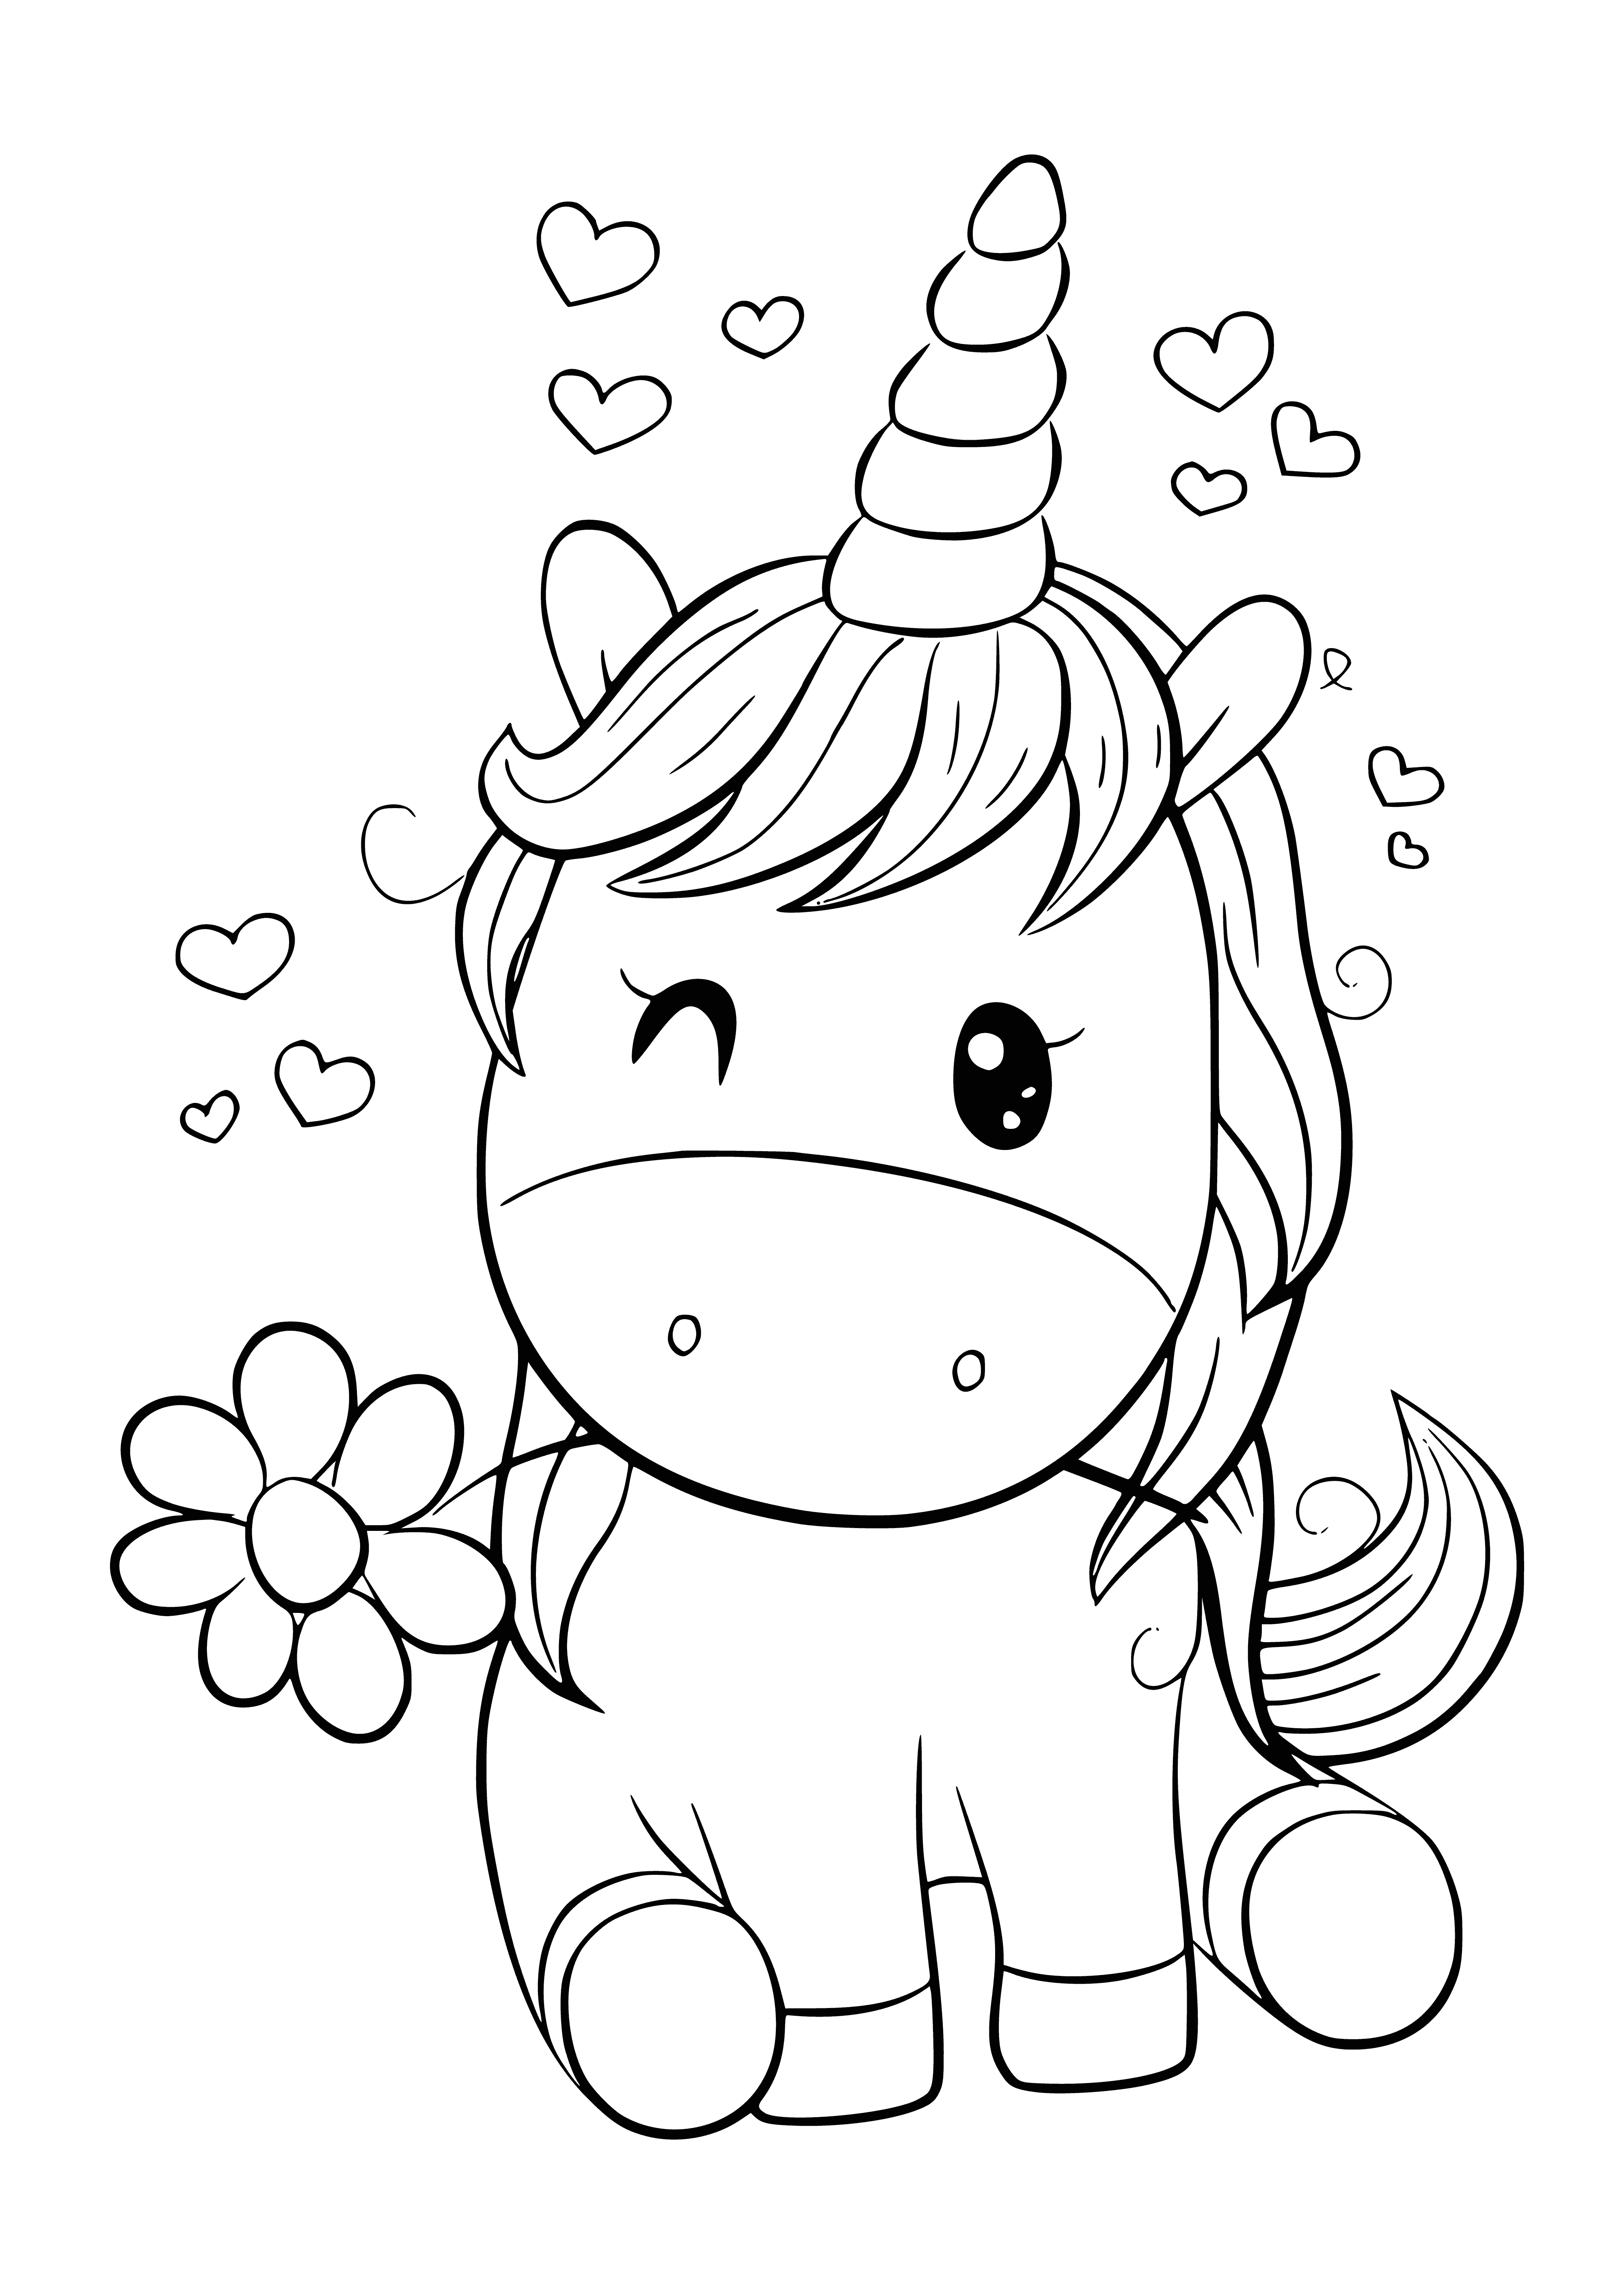 coloring page: Kawaii cute coloring page featuring a Unicorn with rainbow mane/tail, stars, hearts.